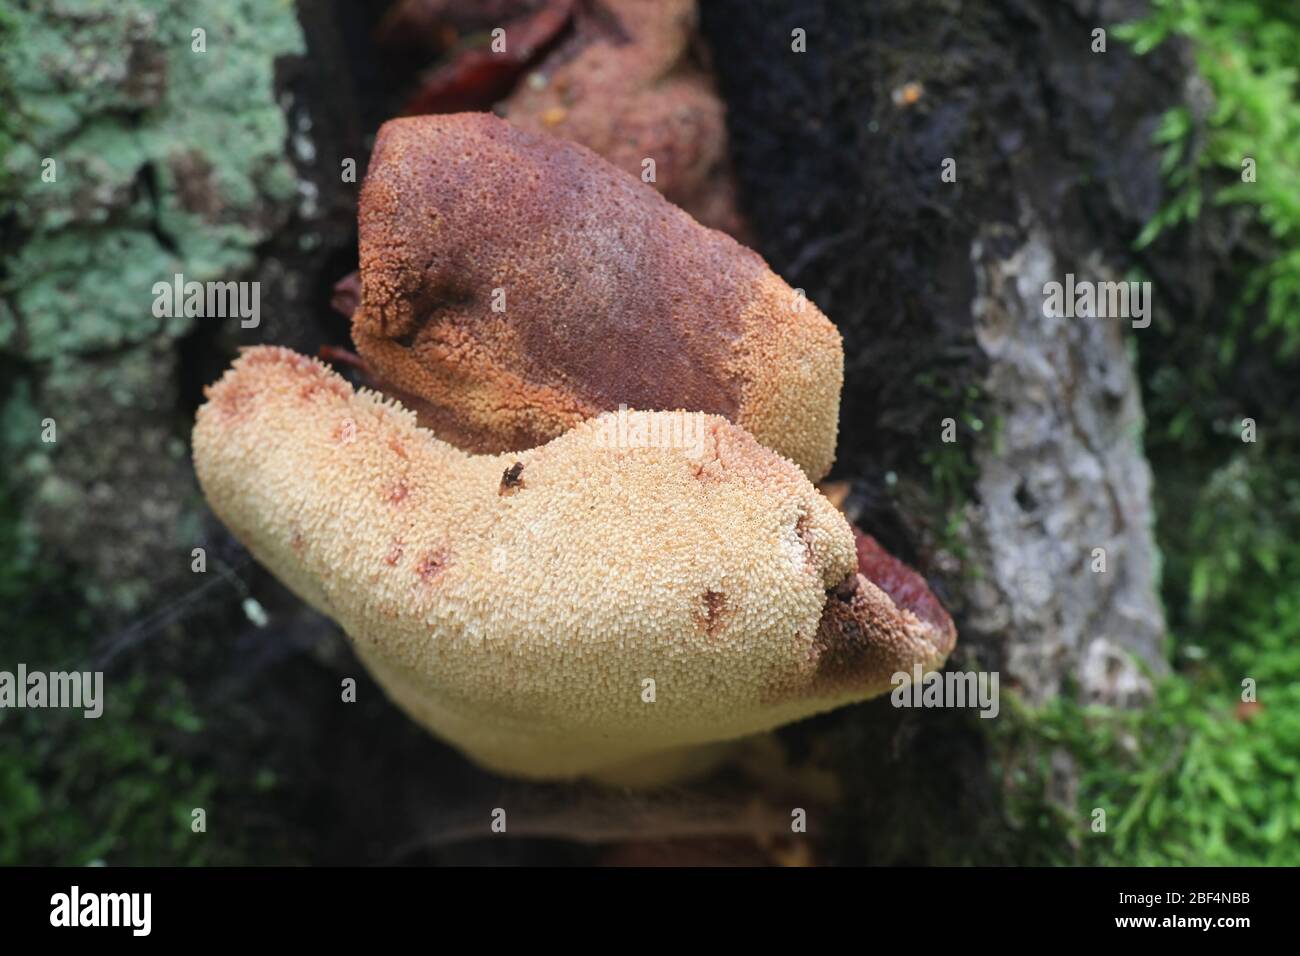 Fistulina hepatica, known as beefsteak fungus, beefsteak polypore, ox tongue and tongue mushroom, growing on oak in Finland Stock Photo